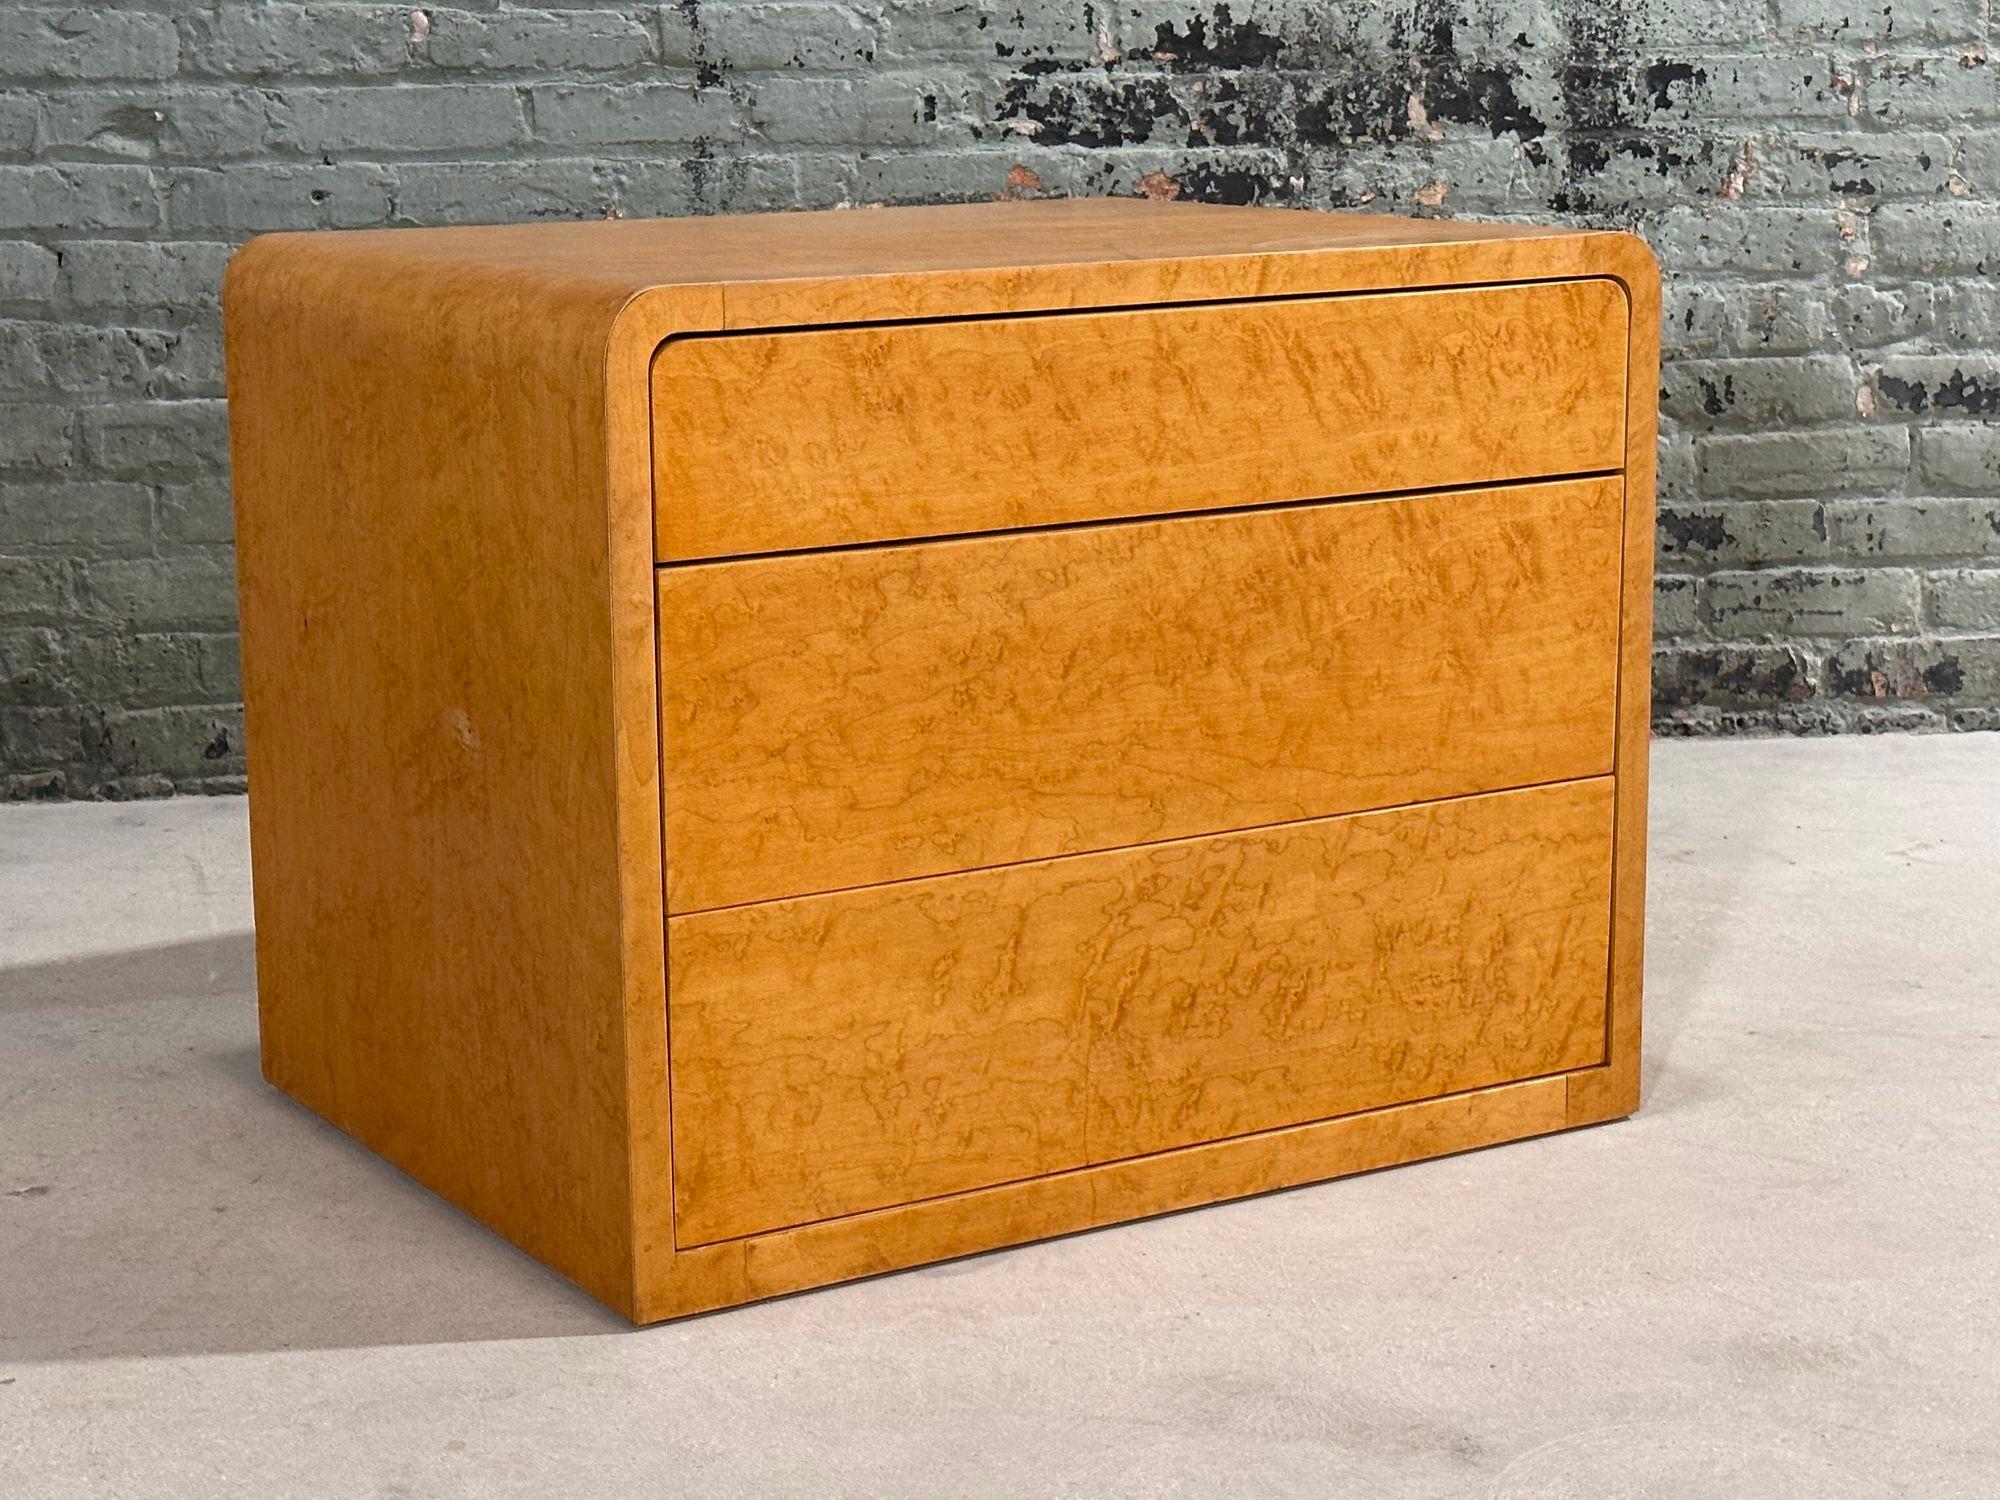 Birdseye Maple Waterfall Night Stand/End Table, 1970.  Original with 3 drawers.
 Birdseye maple waterfall nightstand would be a nightstand made from birdseye maple wood with a design that showcases the wood's natural grain pattern in a flowing